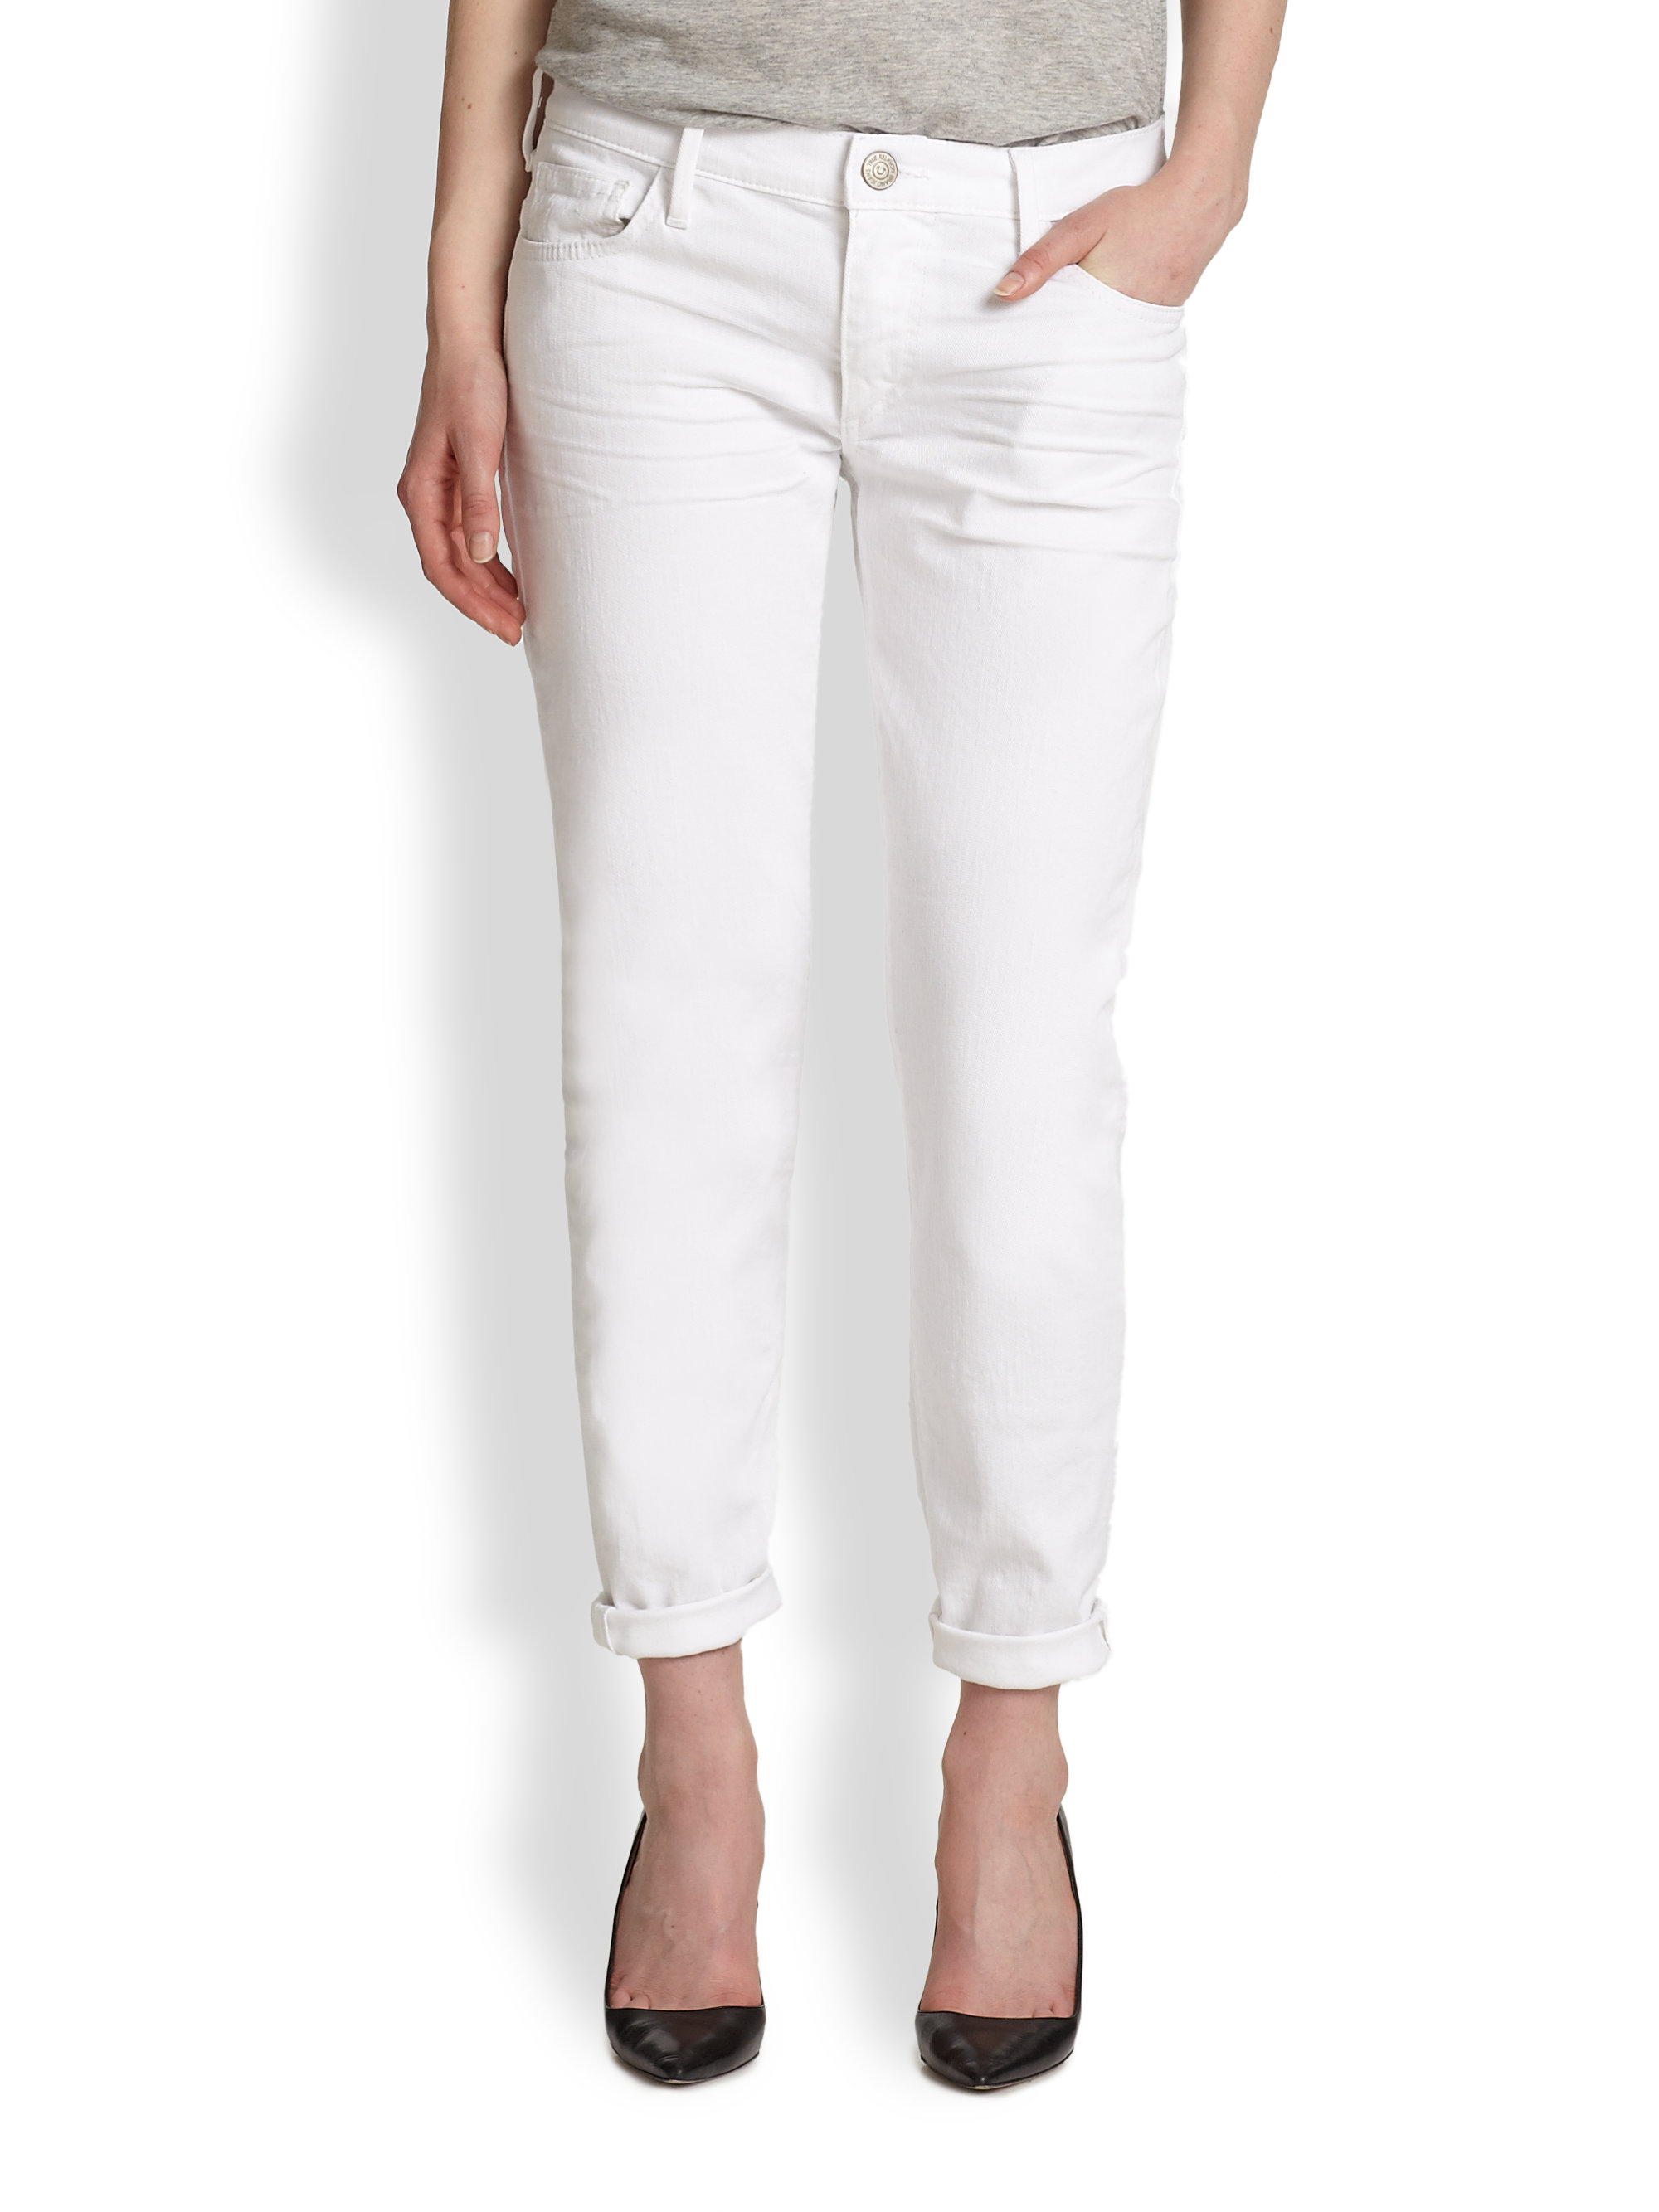 True religion Audrey Slim Relaxedfit Ankle Jeans in White | Lyst